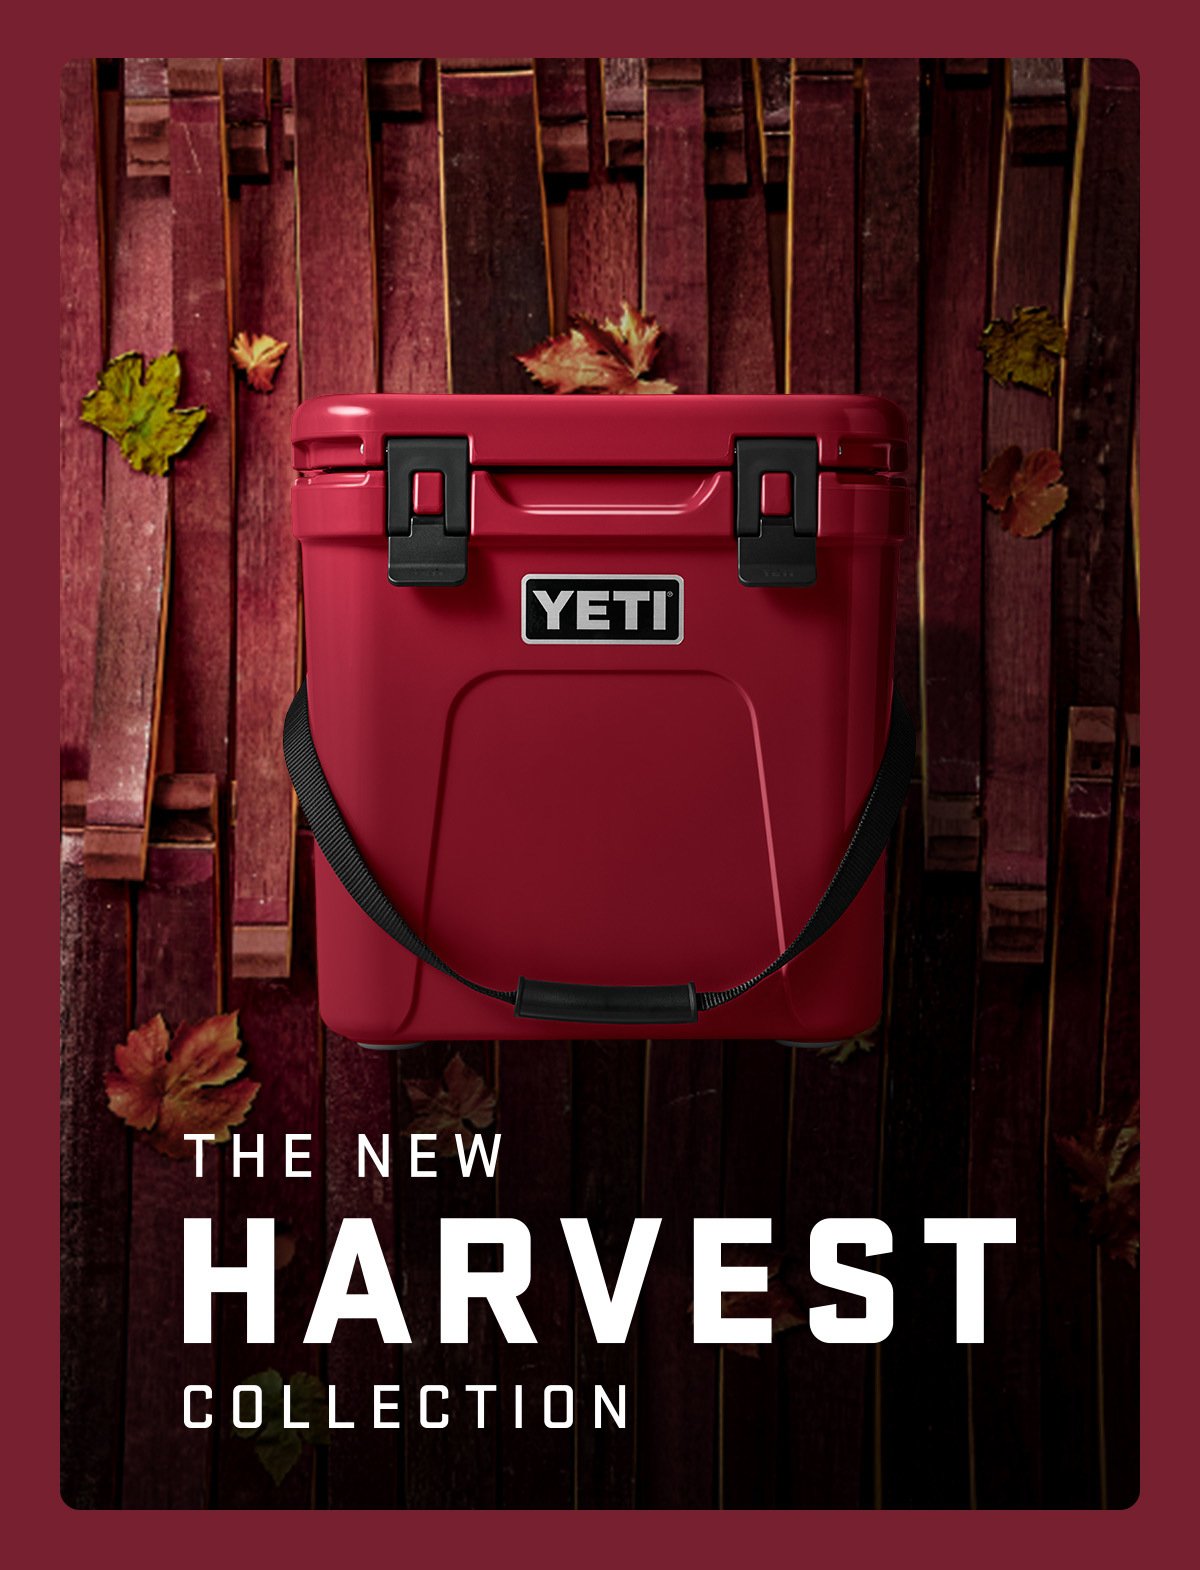 YETI: The New Harvest Collection Is Here